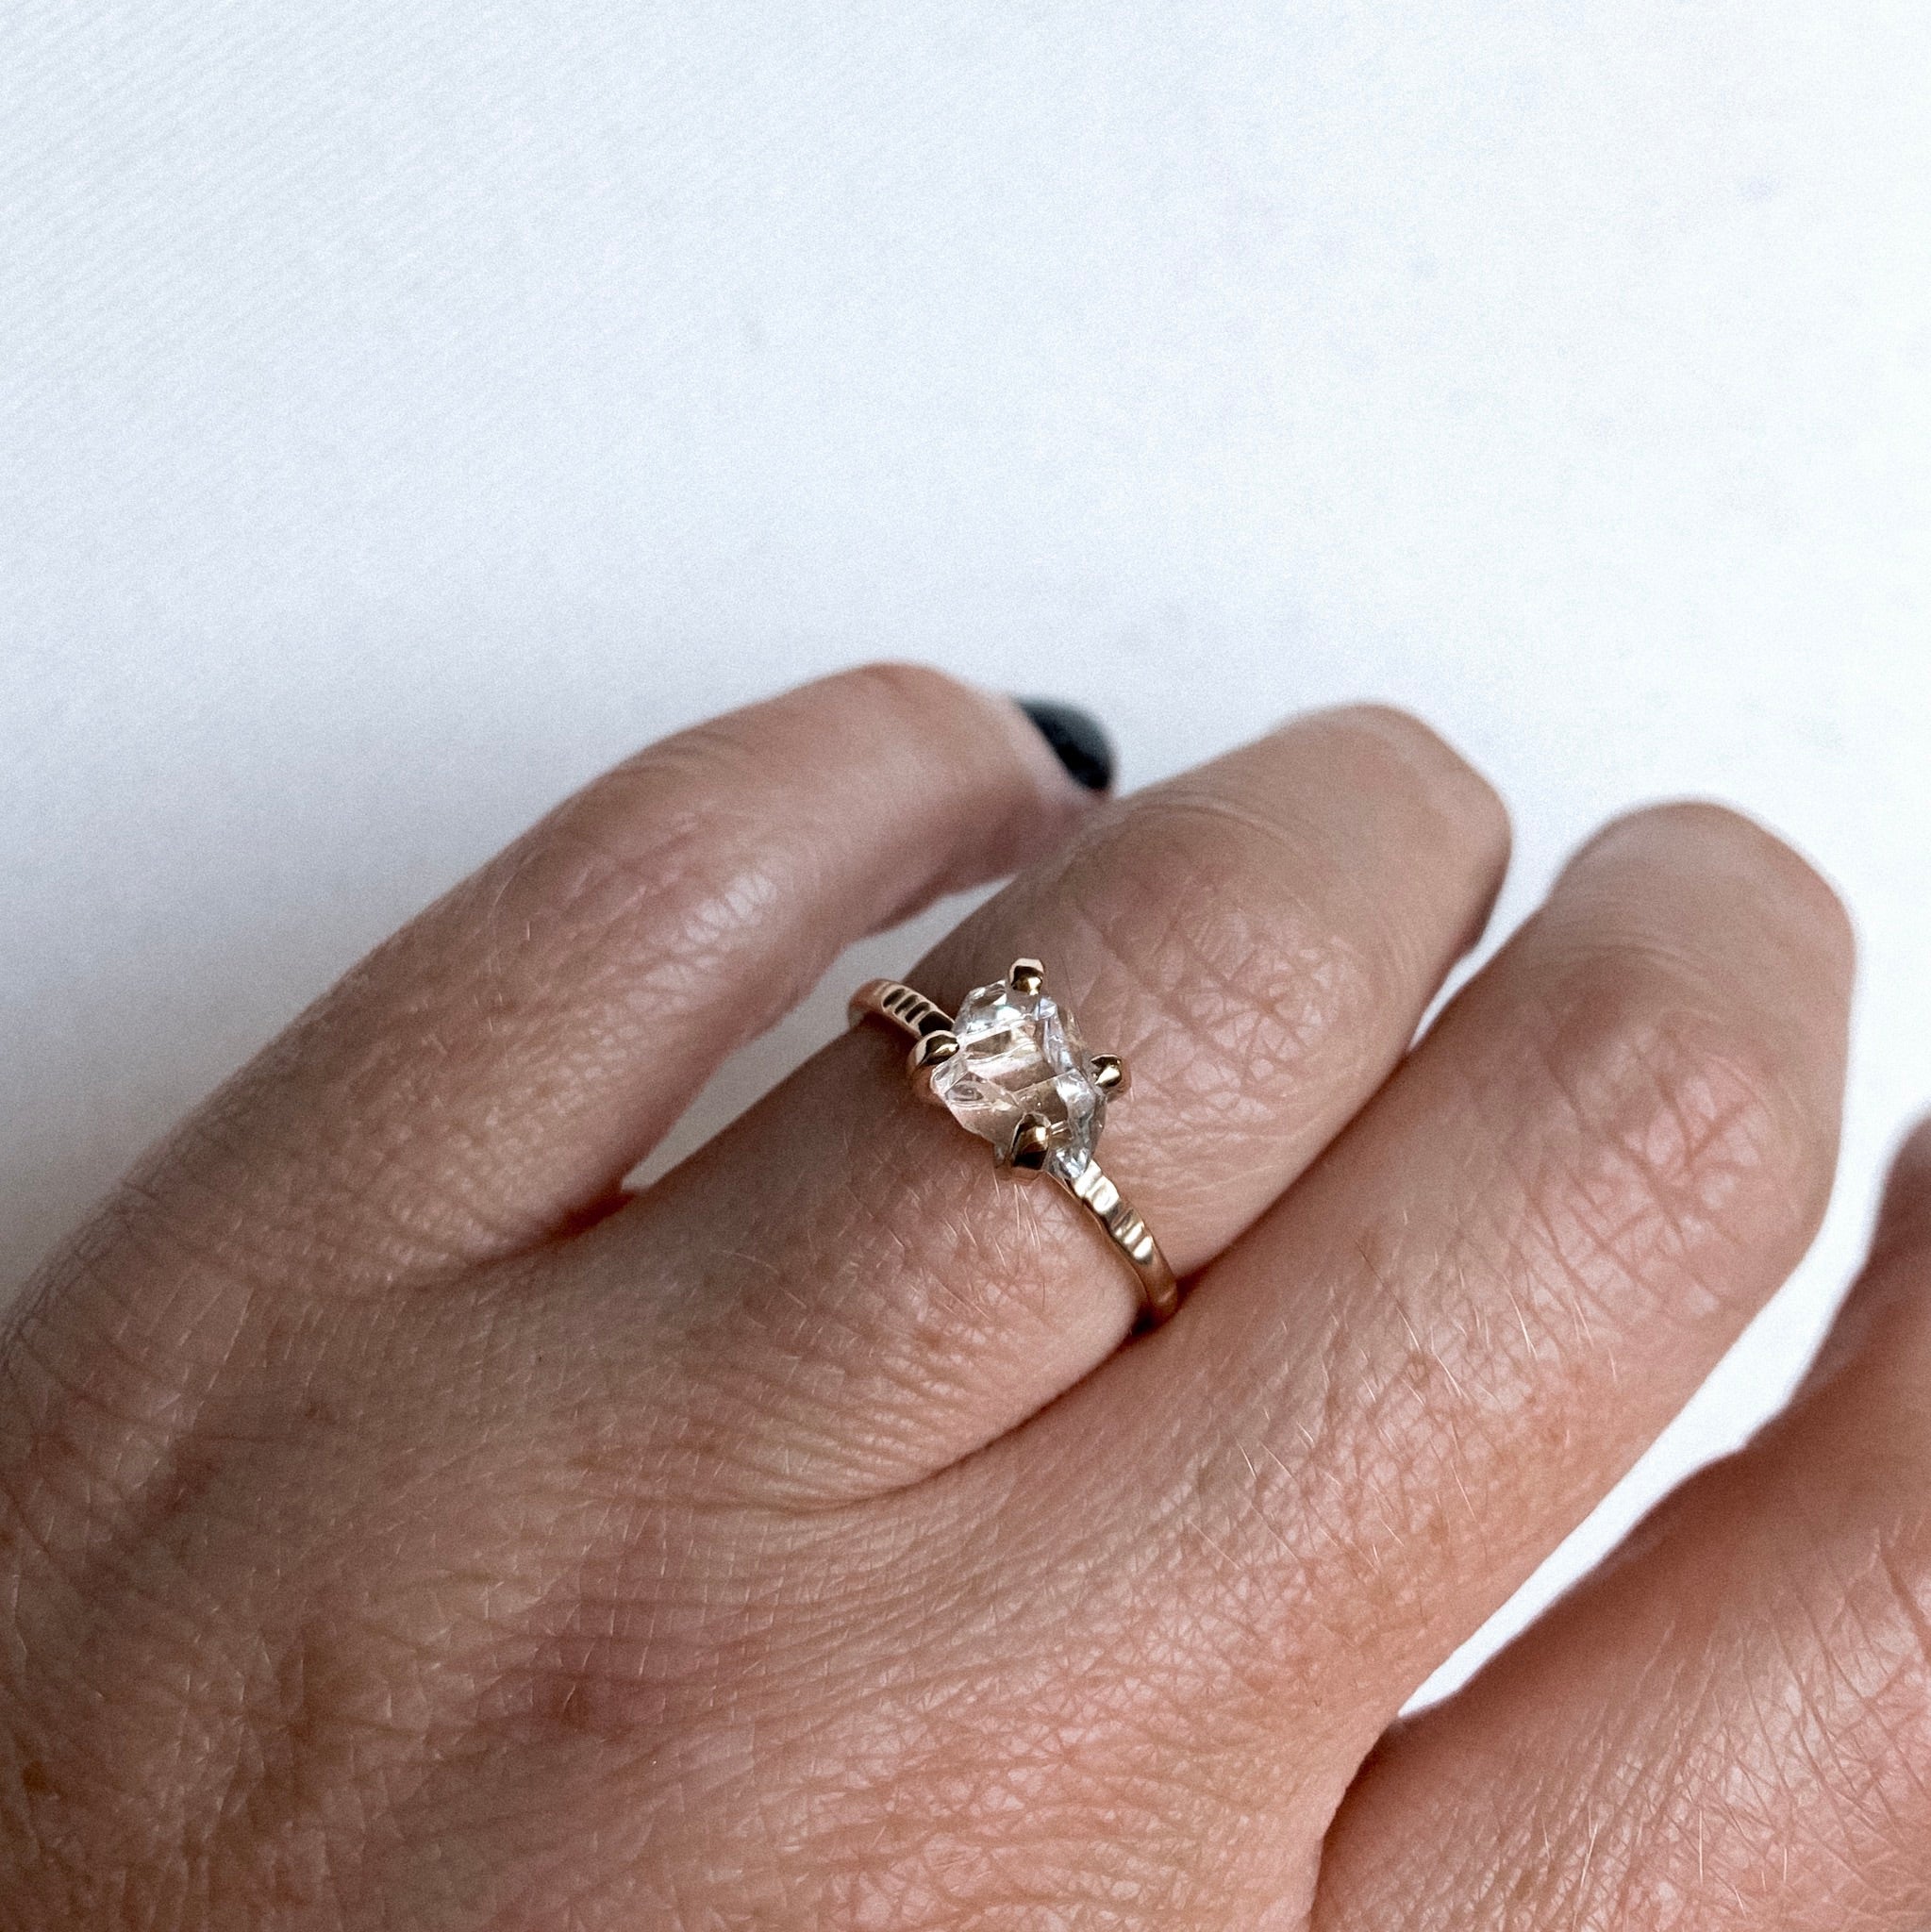 a close up of a finger wearing a gold claw style ring with a herkimer diamond